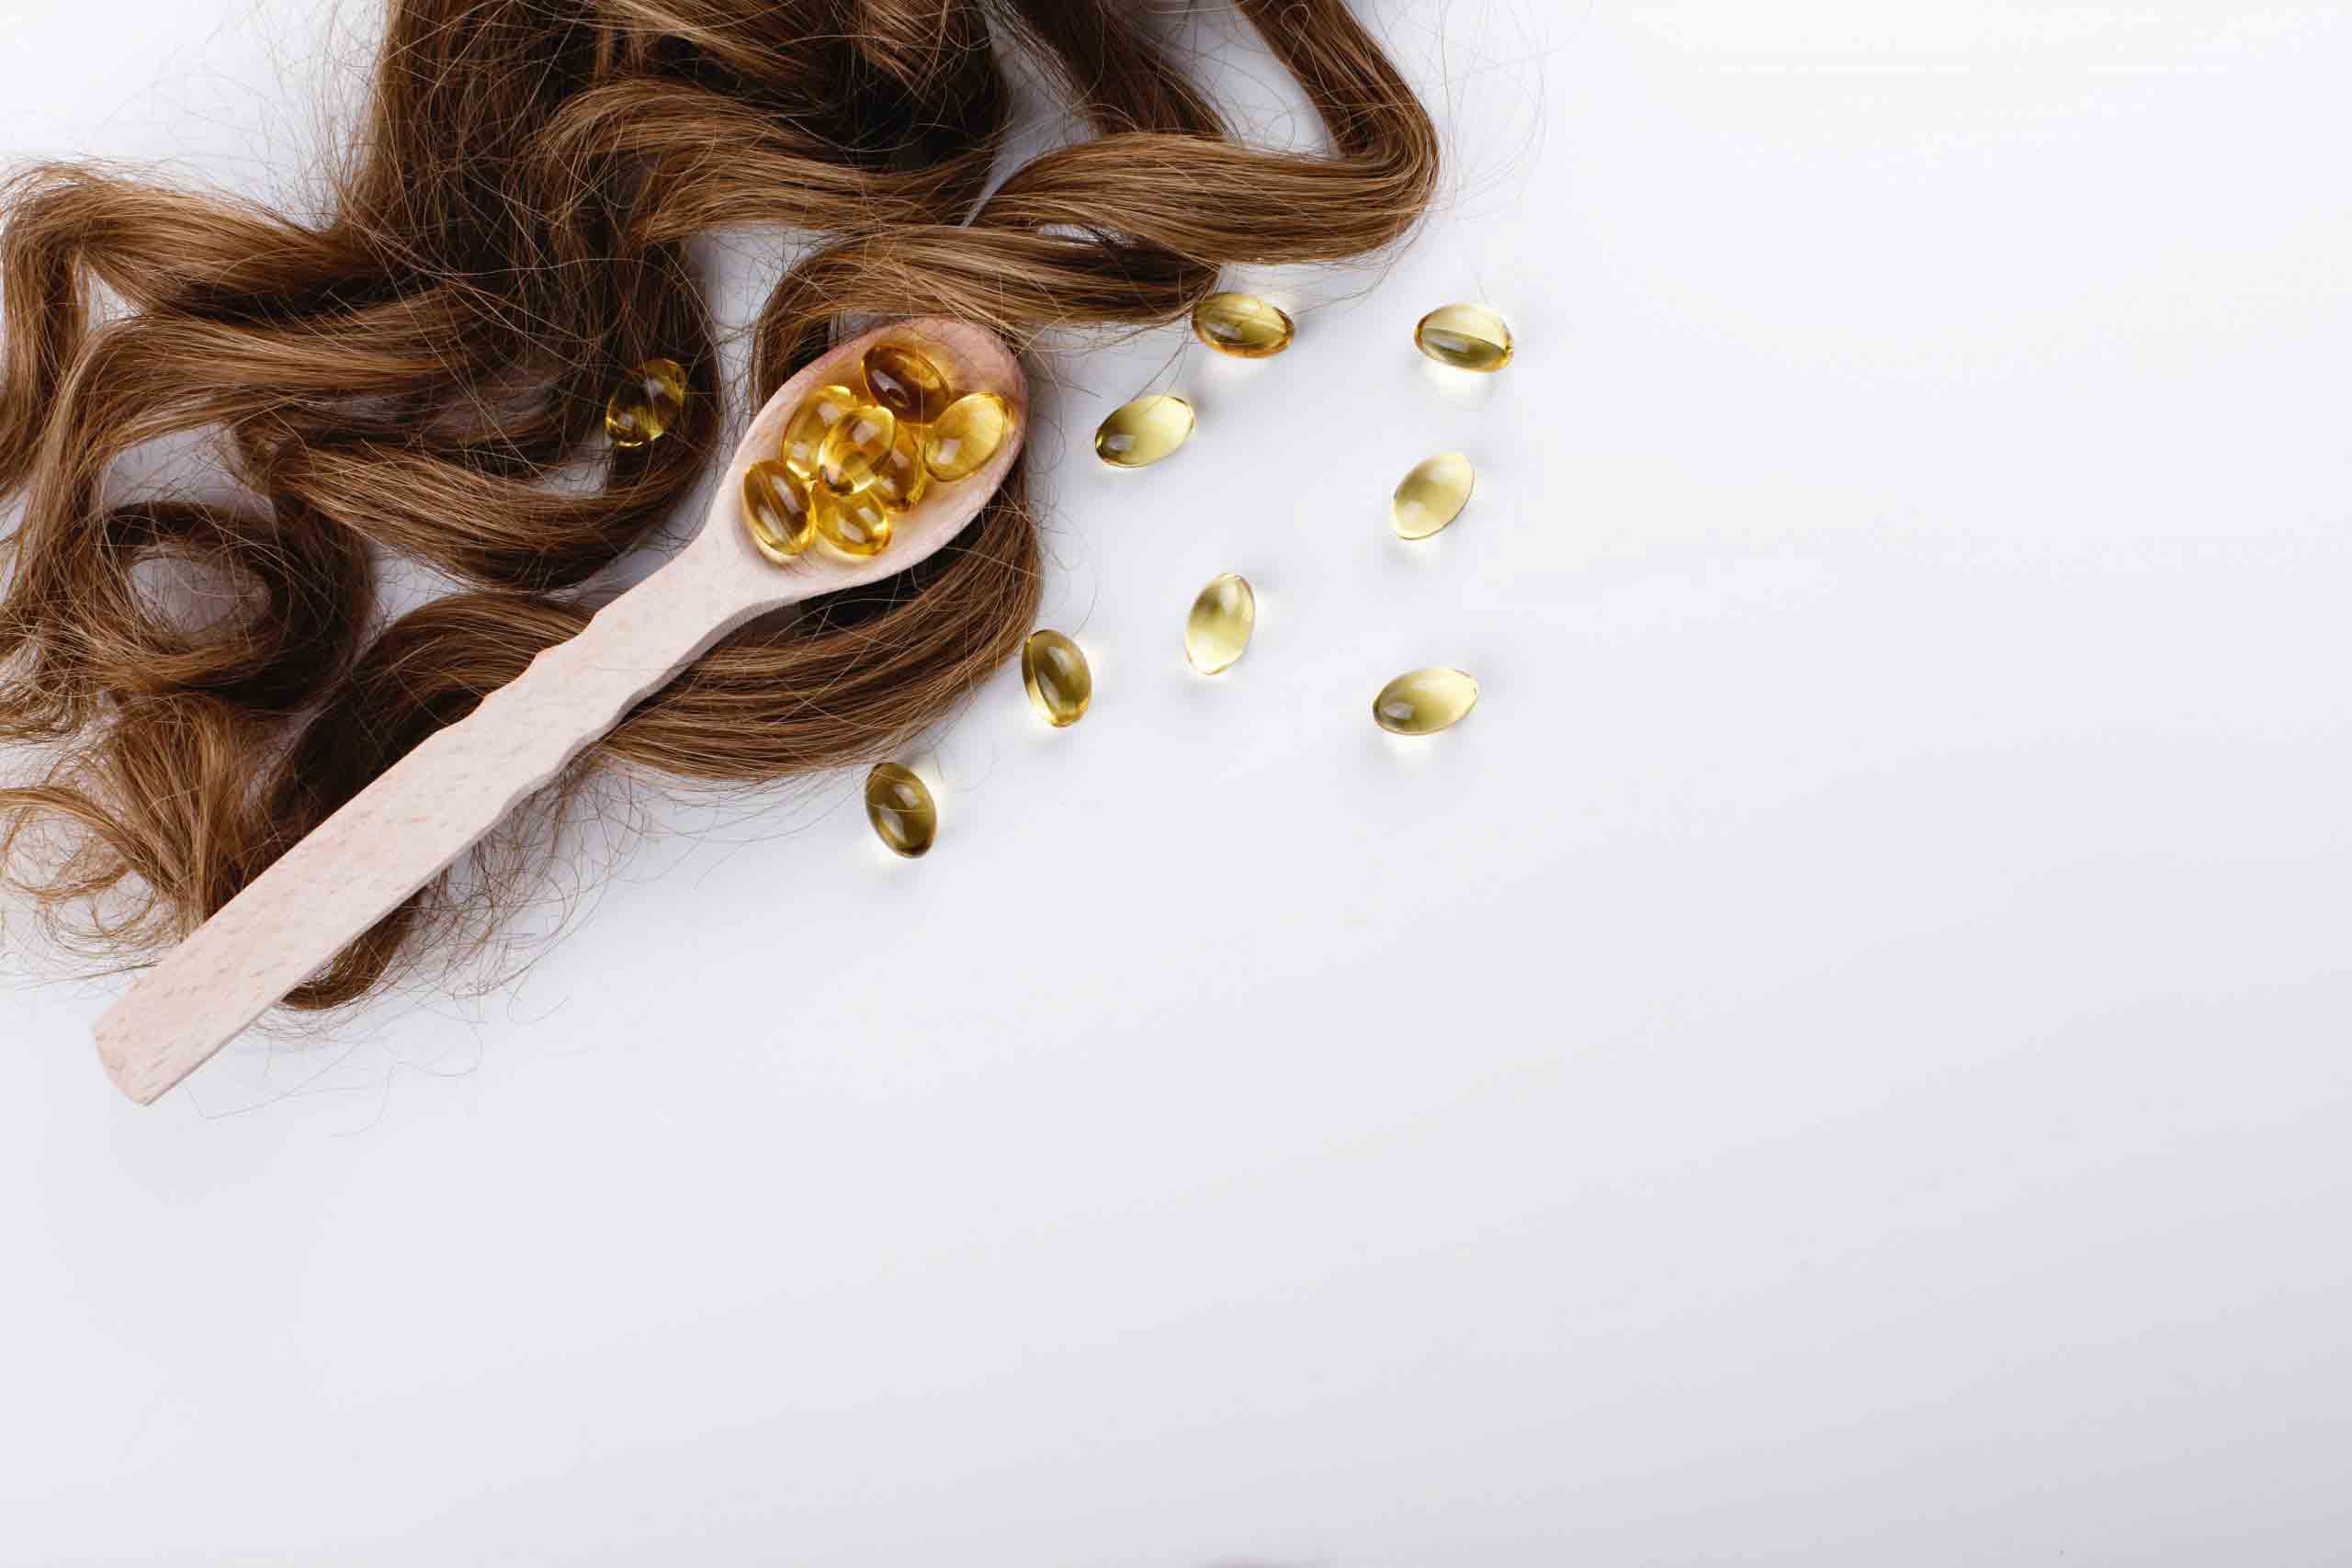 Benefits of Vitamin E for Hair